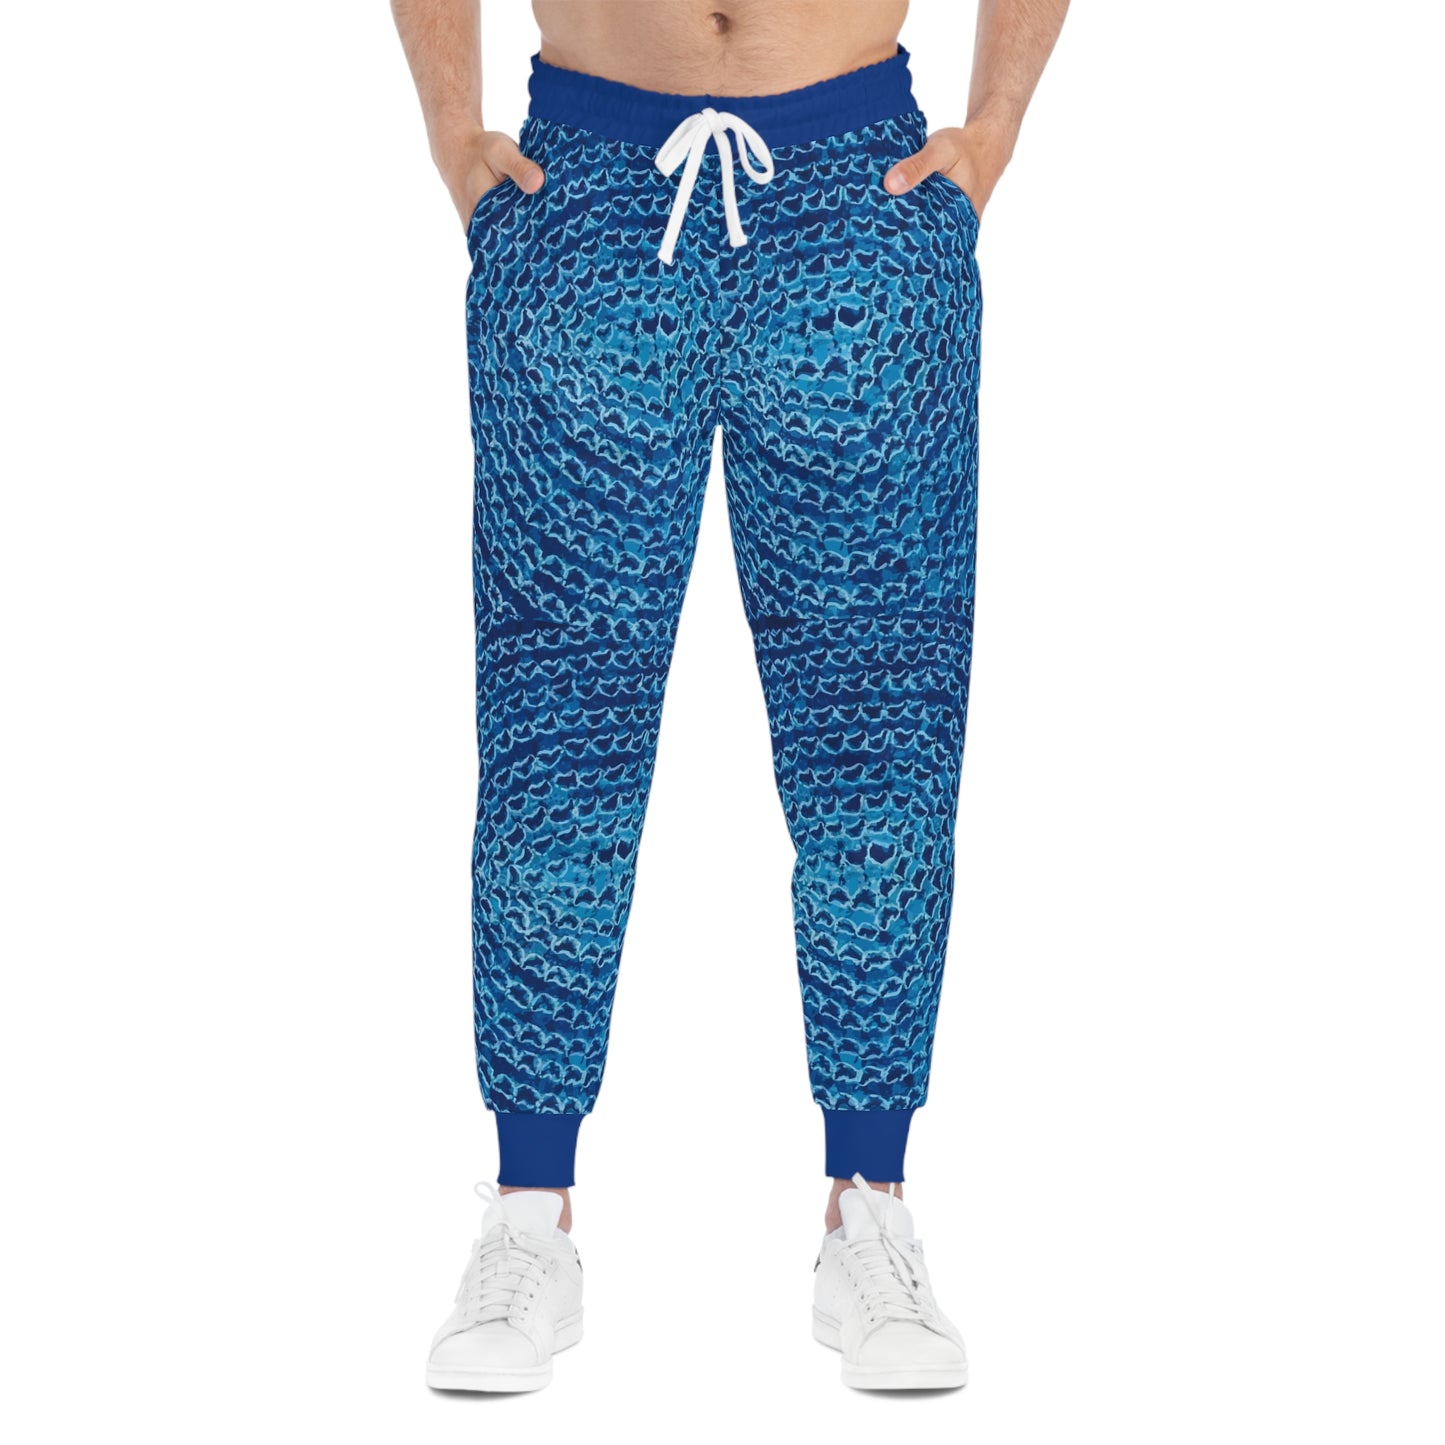 Alakete (Hat) Athletic Joggers